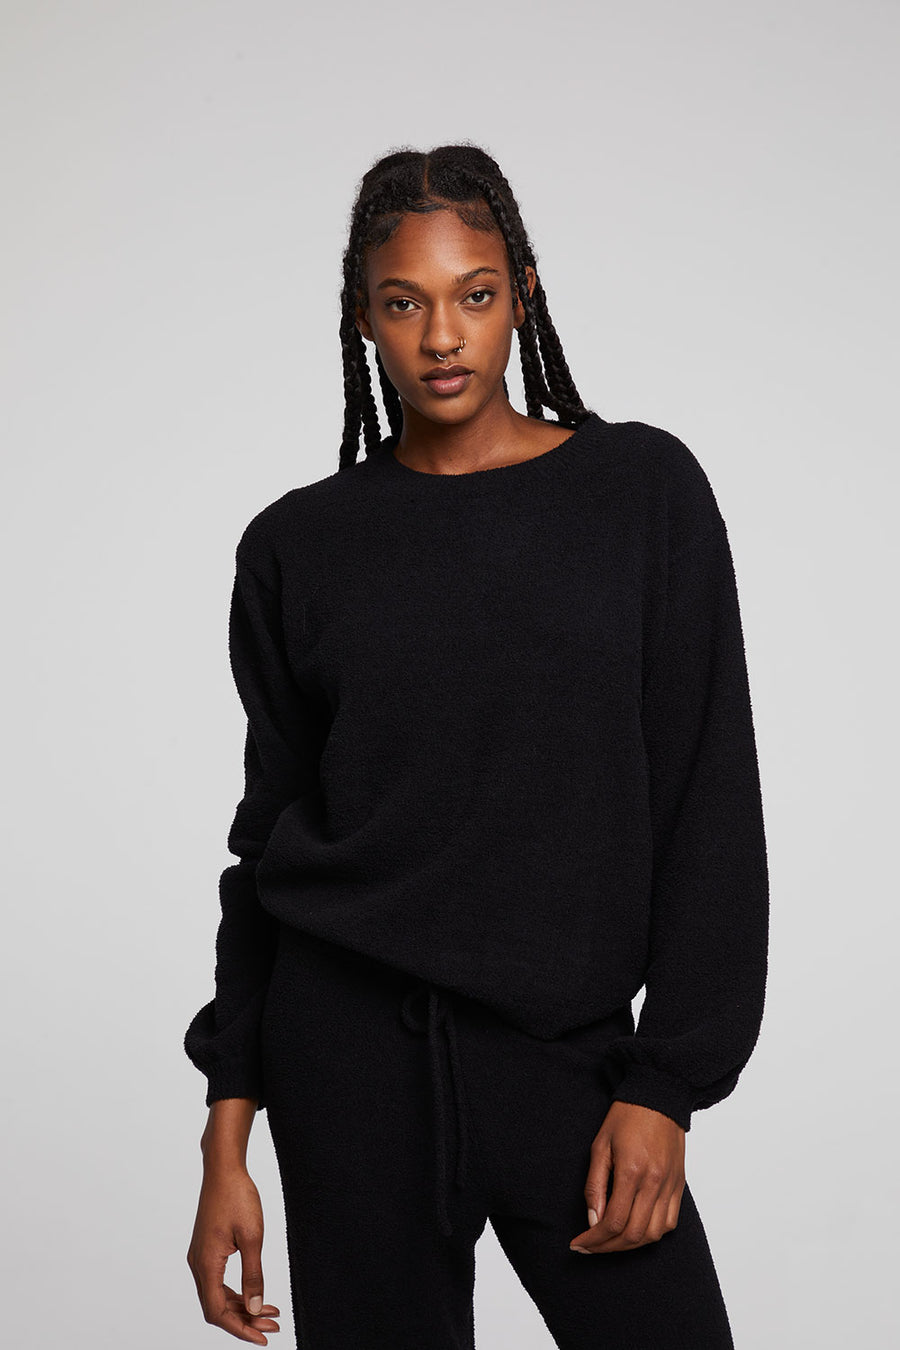 Frankie Licorice Pullover WOMENS chaserbrand